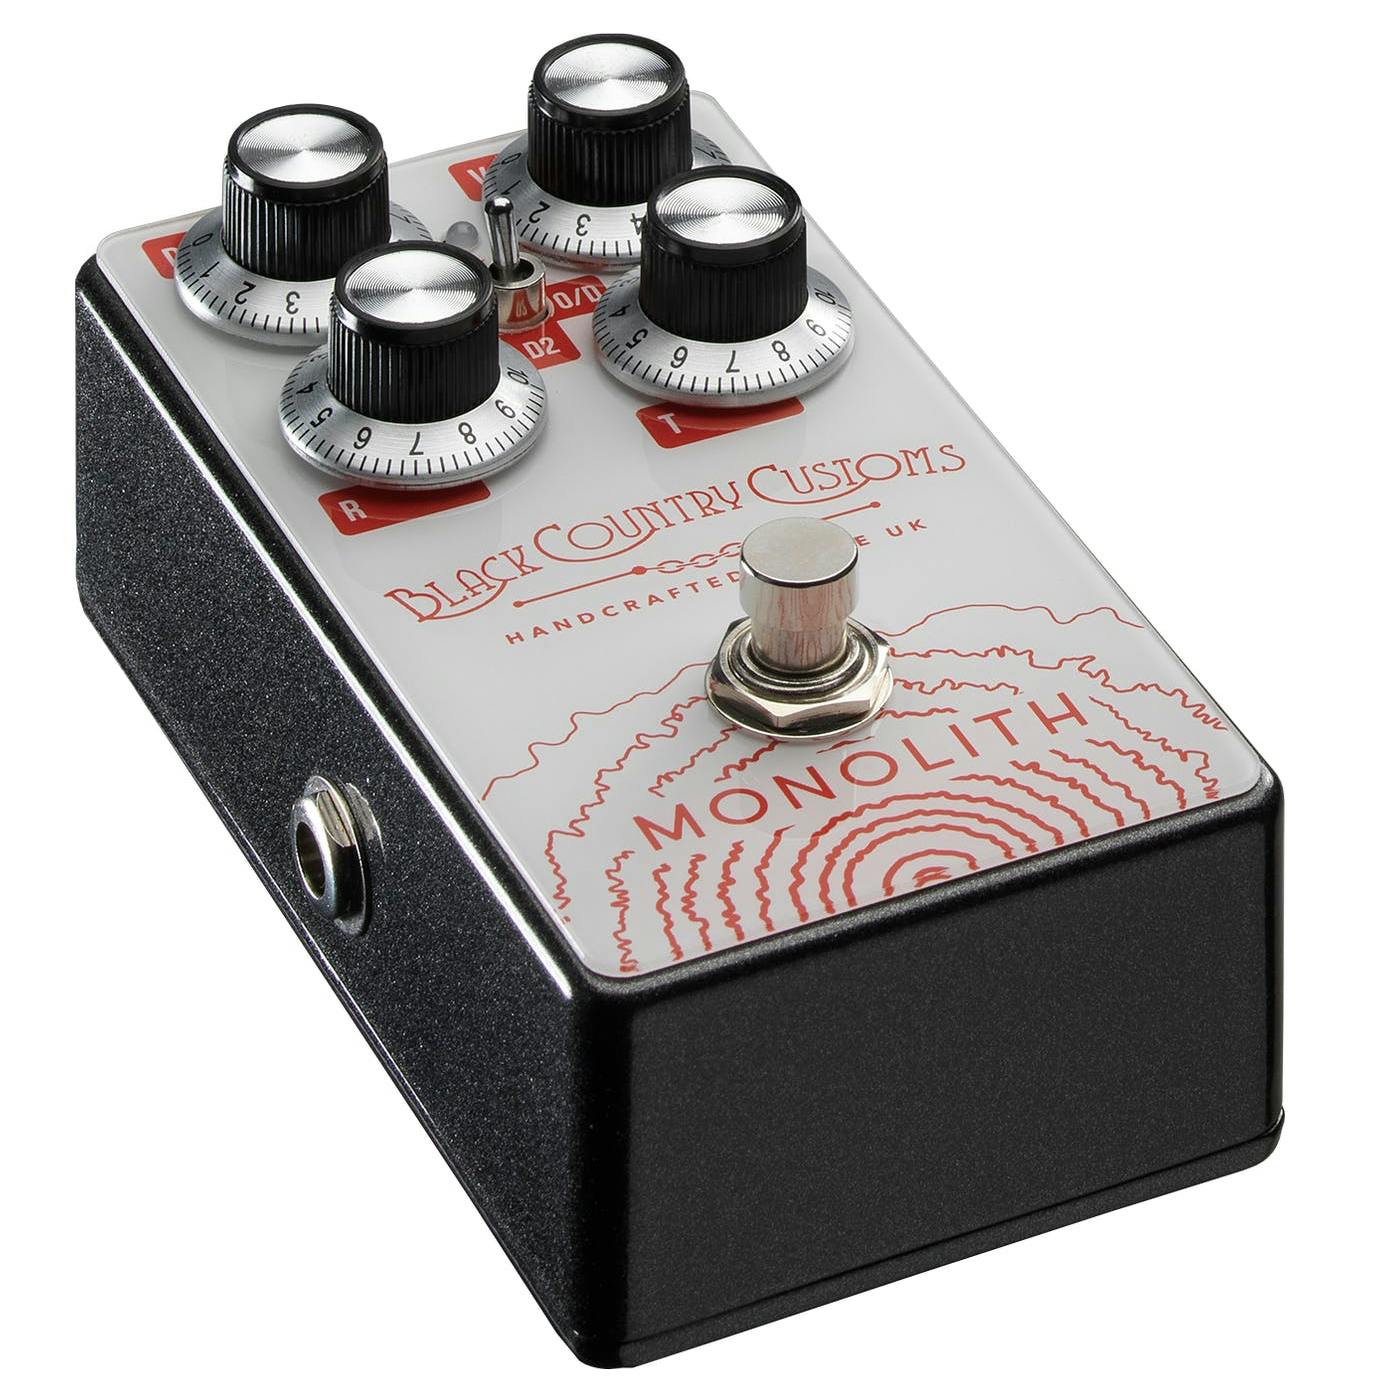 Laney Black Country Customs Monolith Distortion Pedal - Andertons 